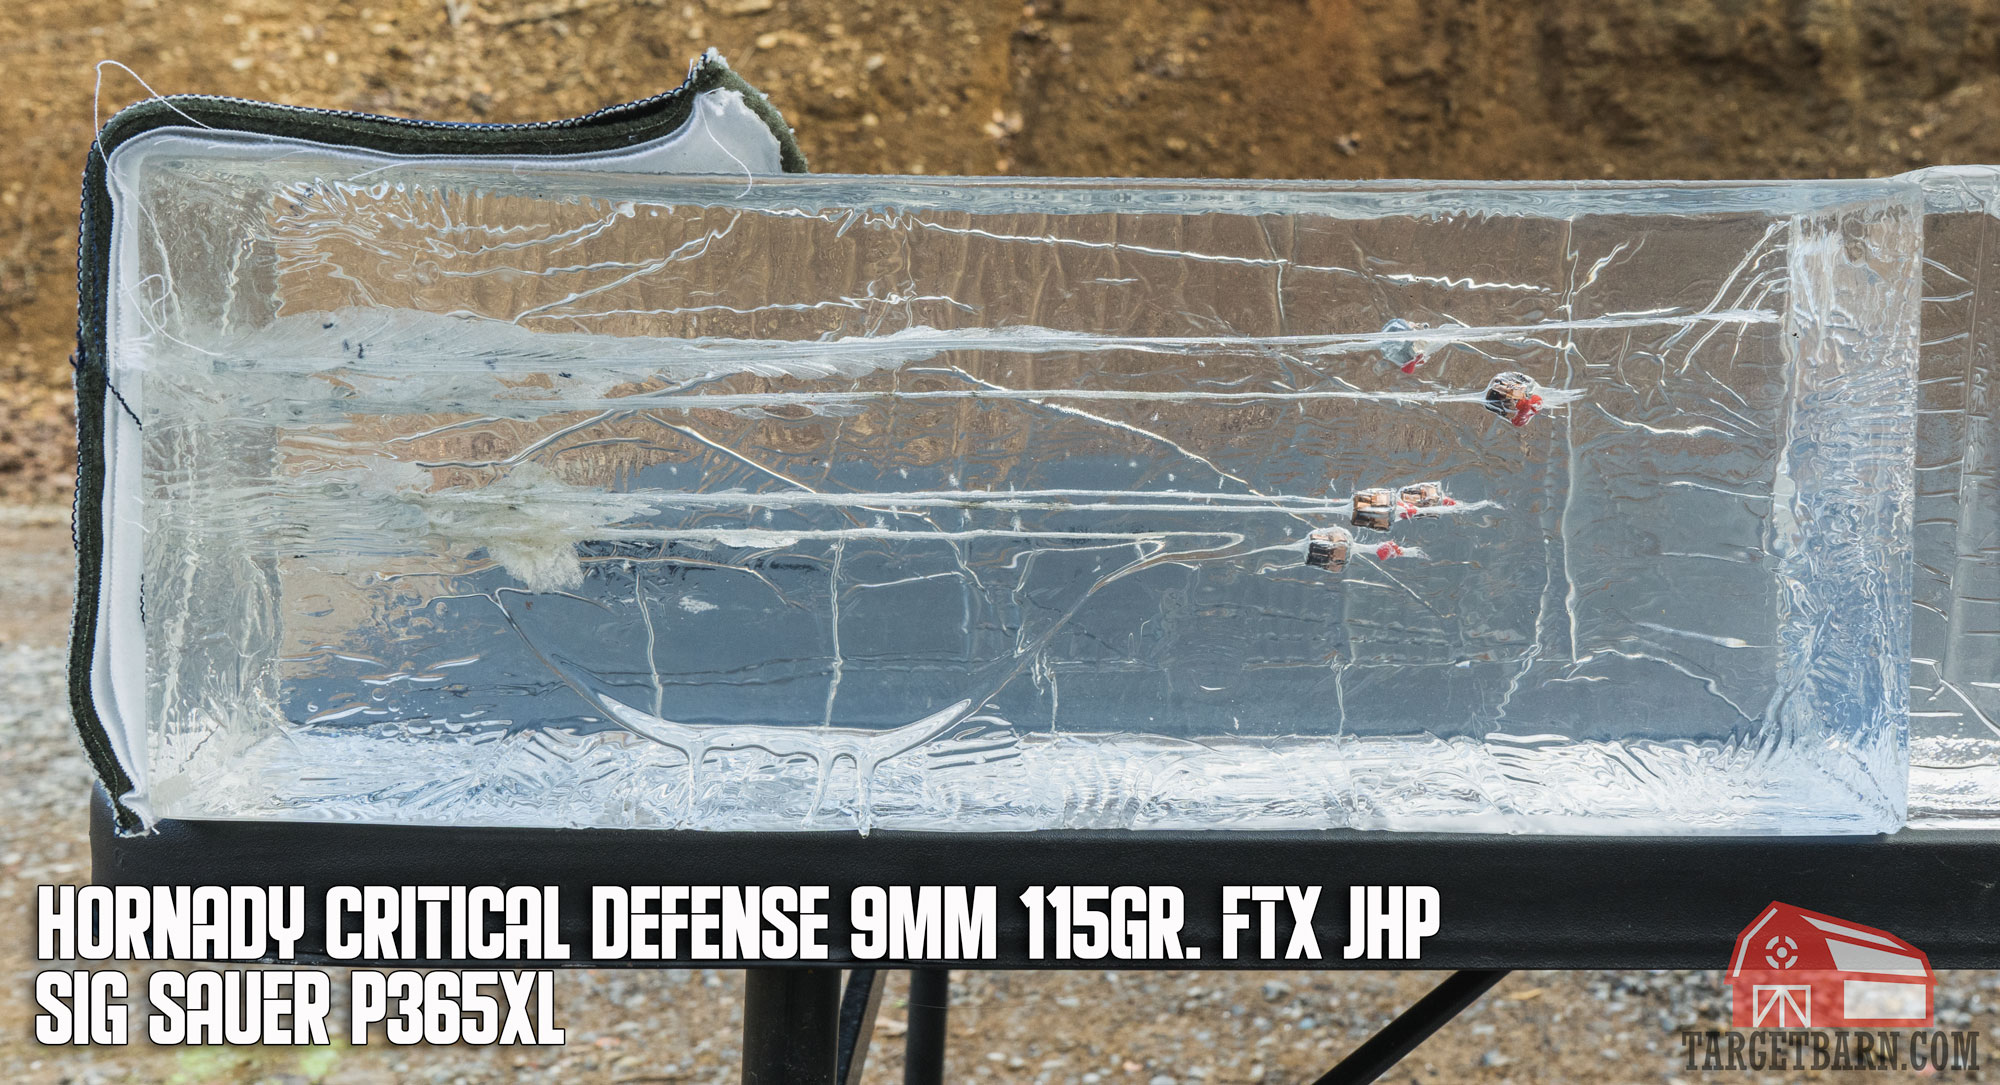 a ballistic gel block with 5 rounds of hornady critical defense fired from a sig p365xl